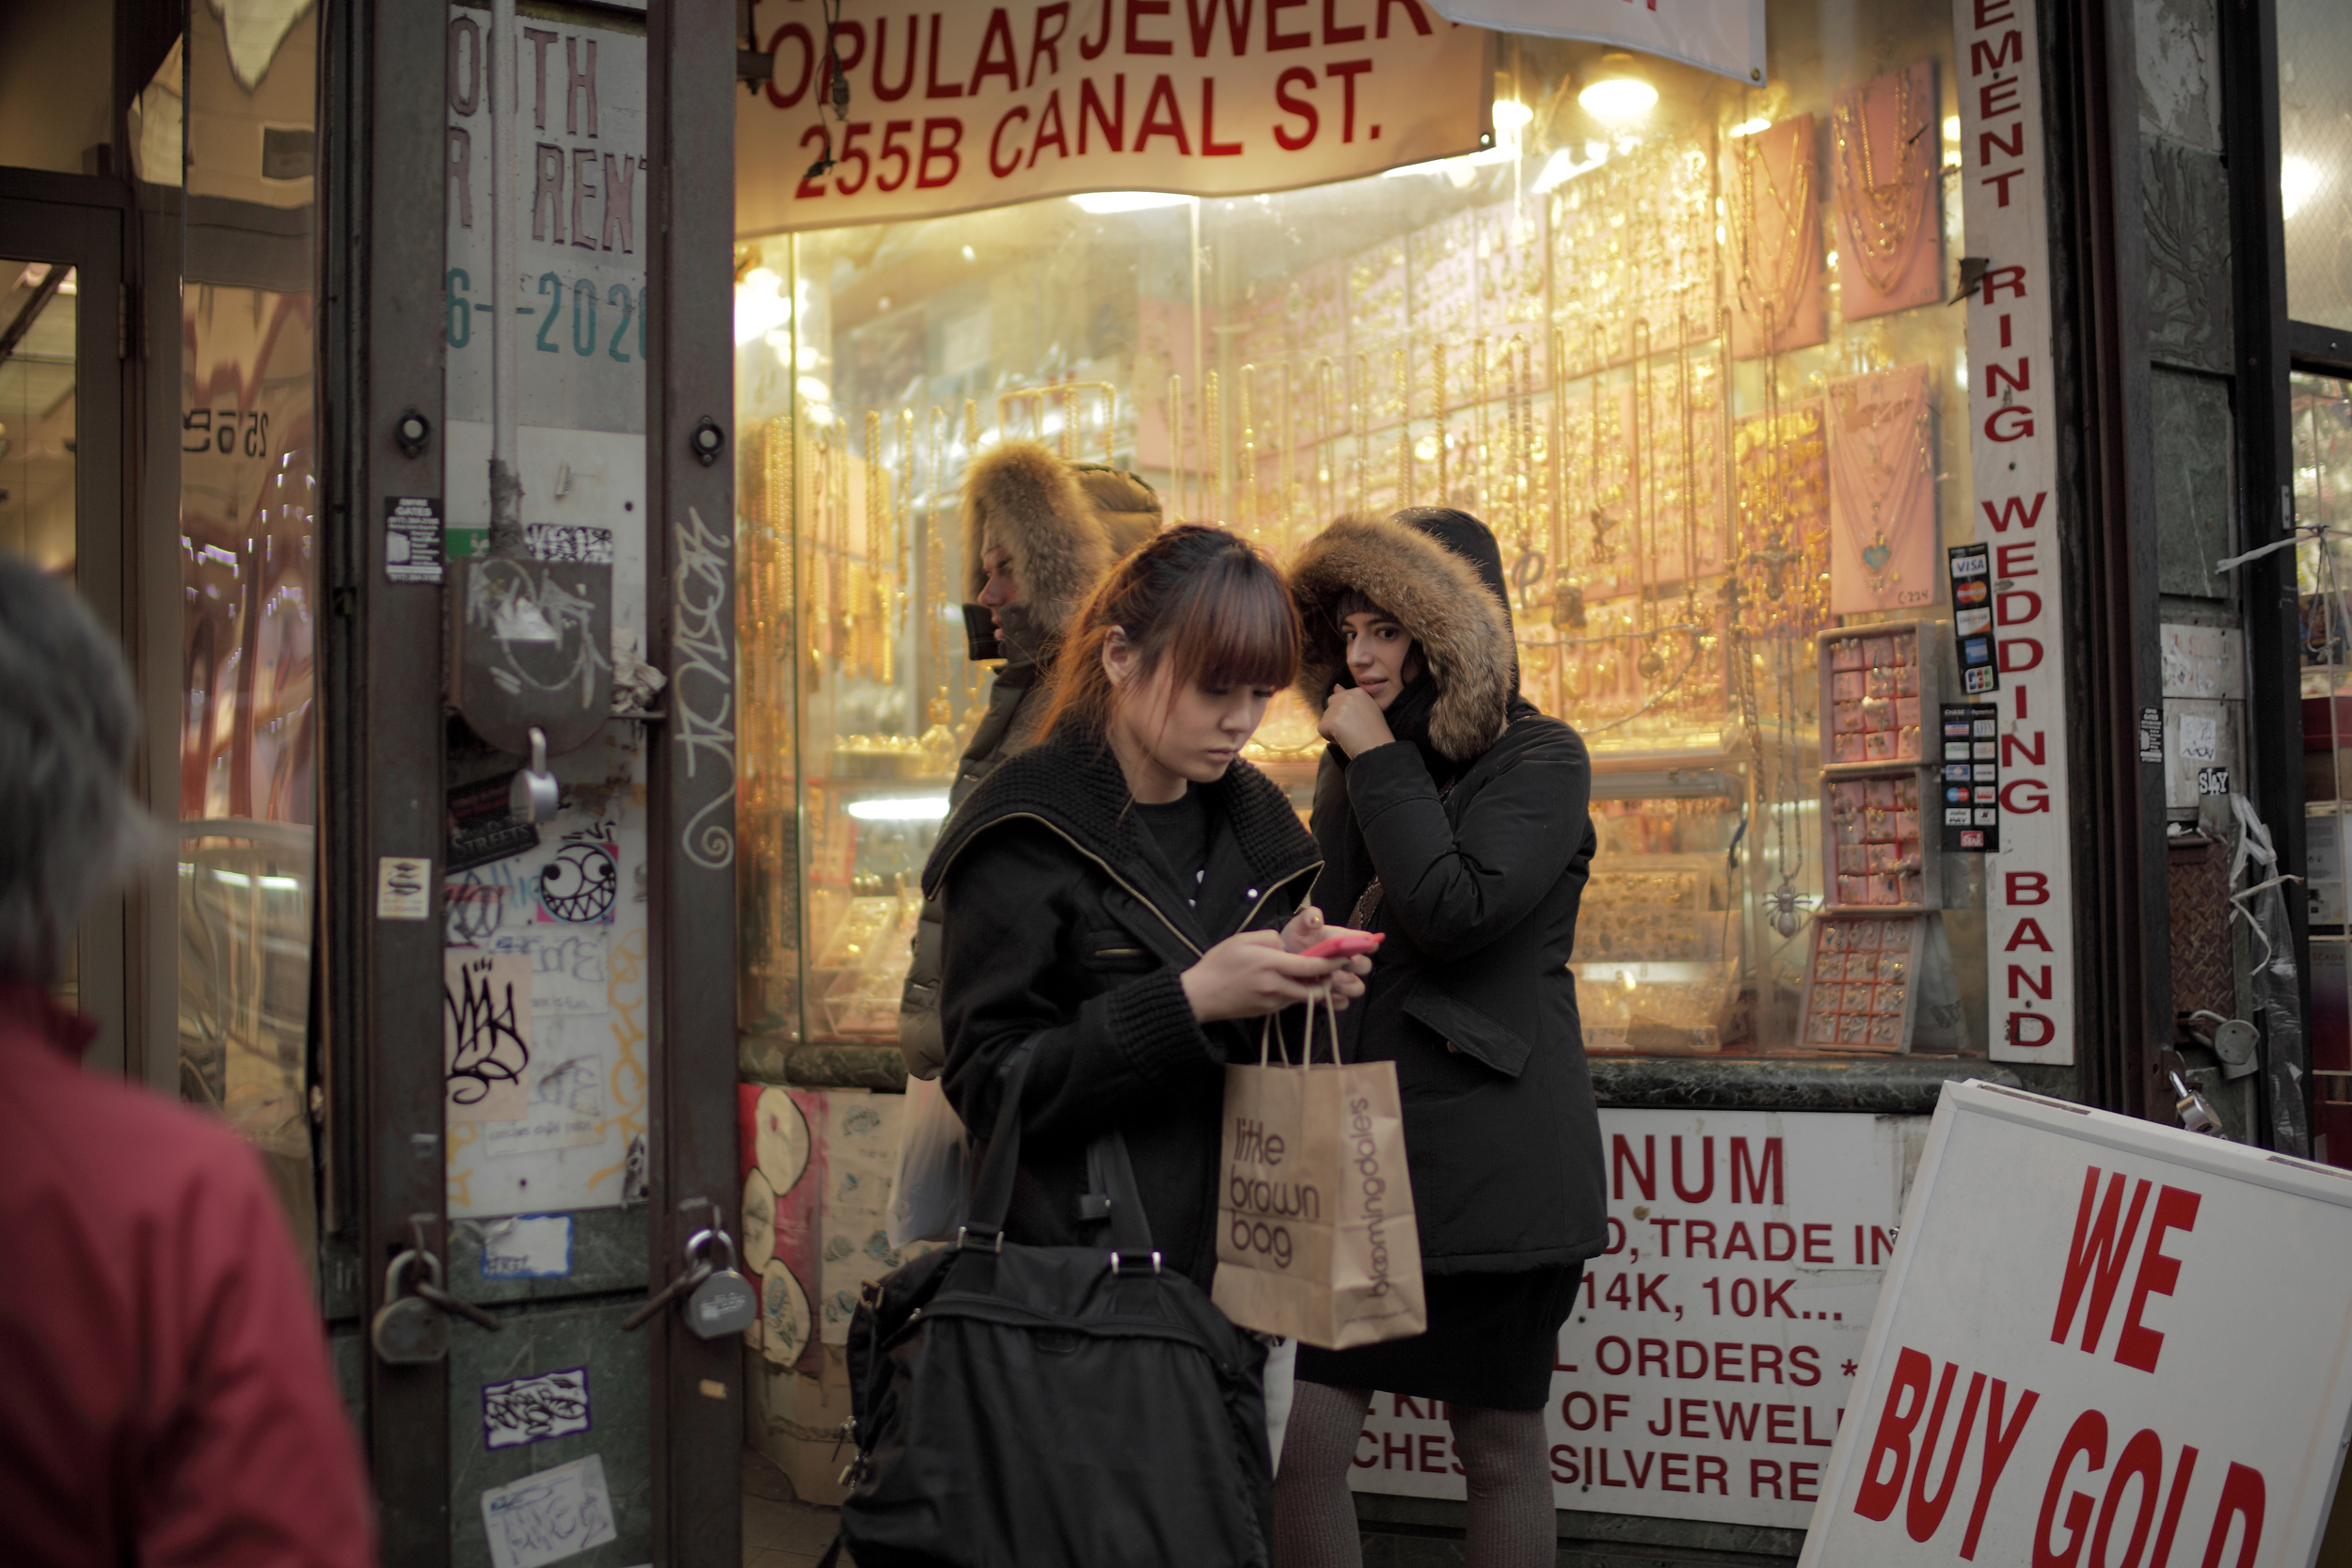 (Canon 5D Mark II + Zeiss Distagon T* 1,4/35 ZE) - One of my favorite places for street photography, Chinatown NYC 